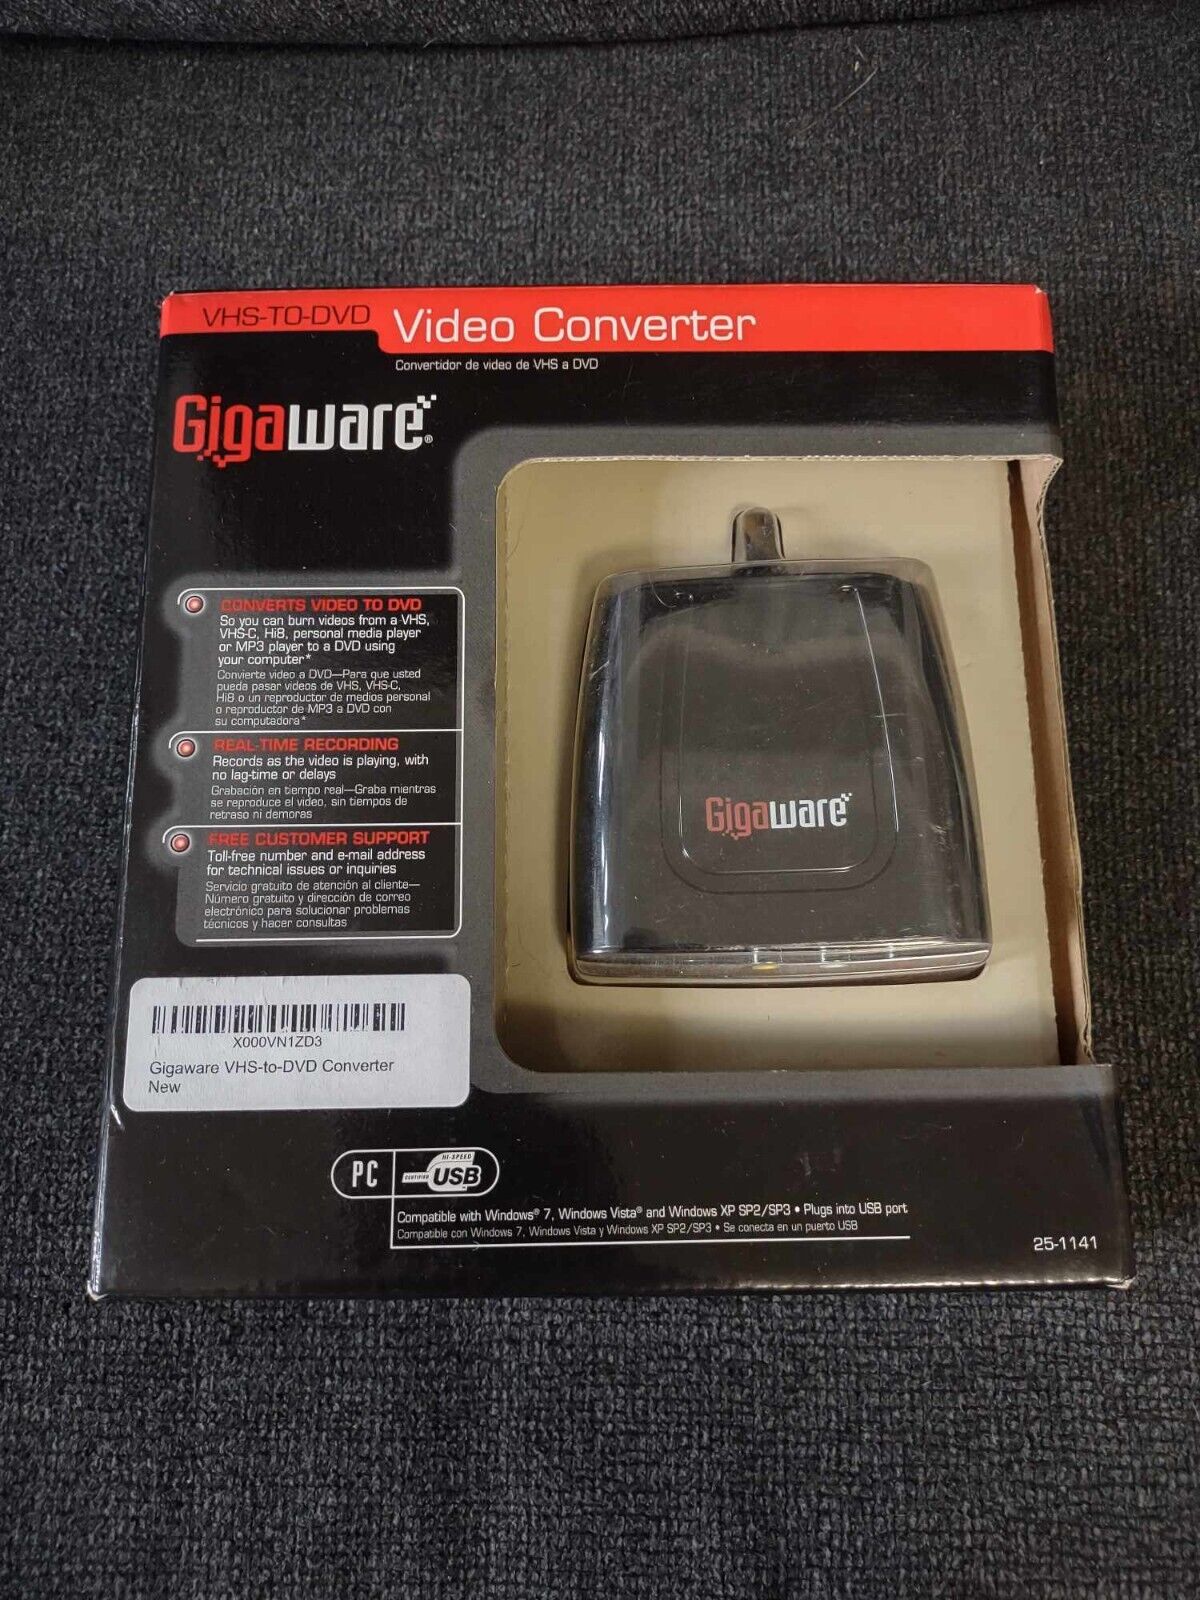 Gigaware 25114 VHS-To-DVD or MP3 Video Converter-New